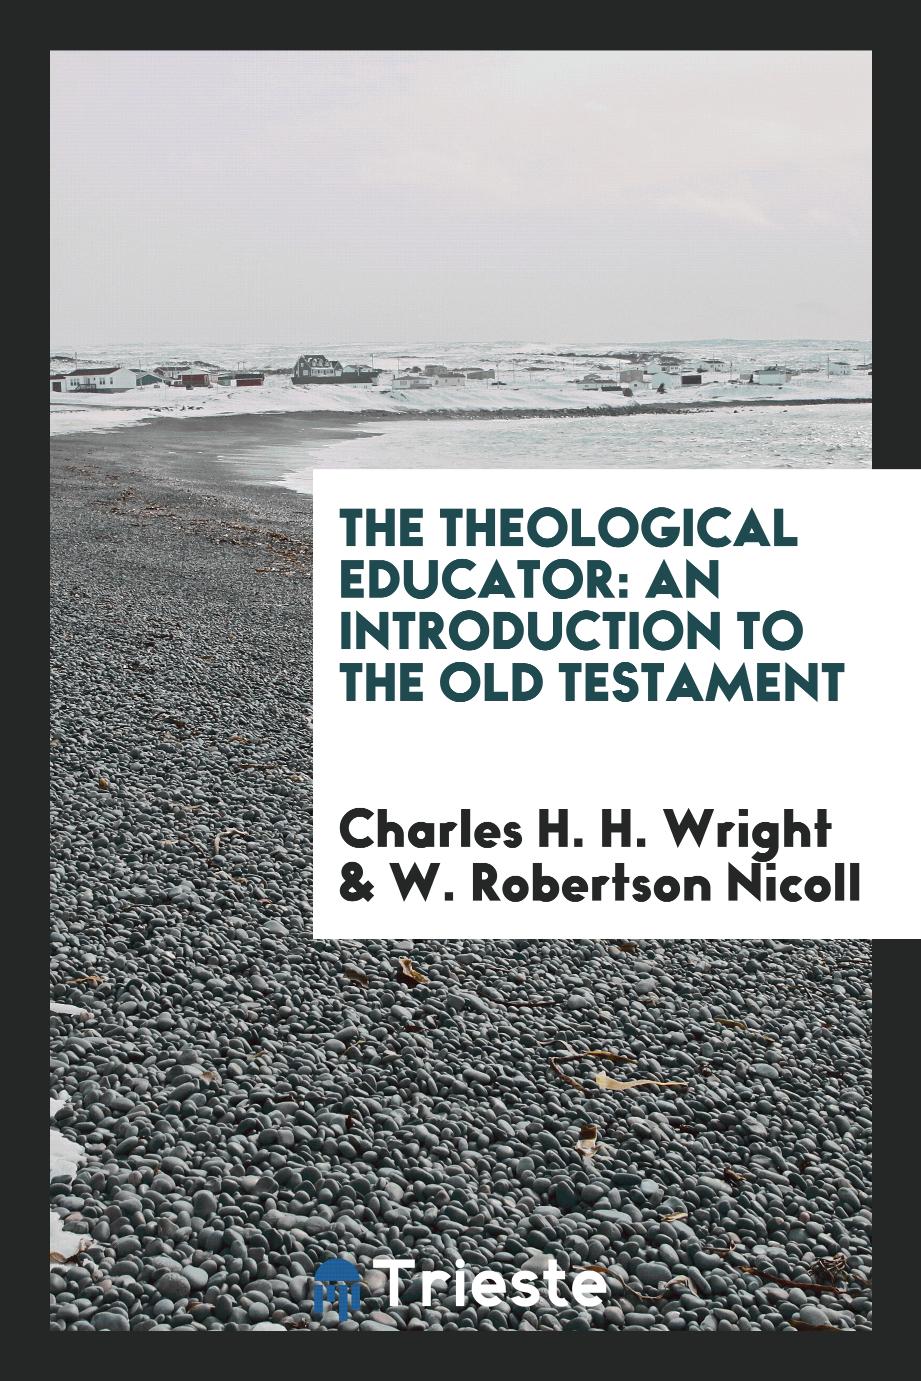 The Theological Educator: An Introduction to the Old Testament